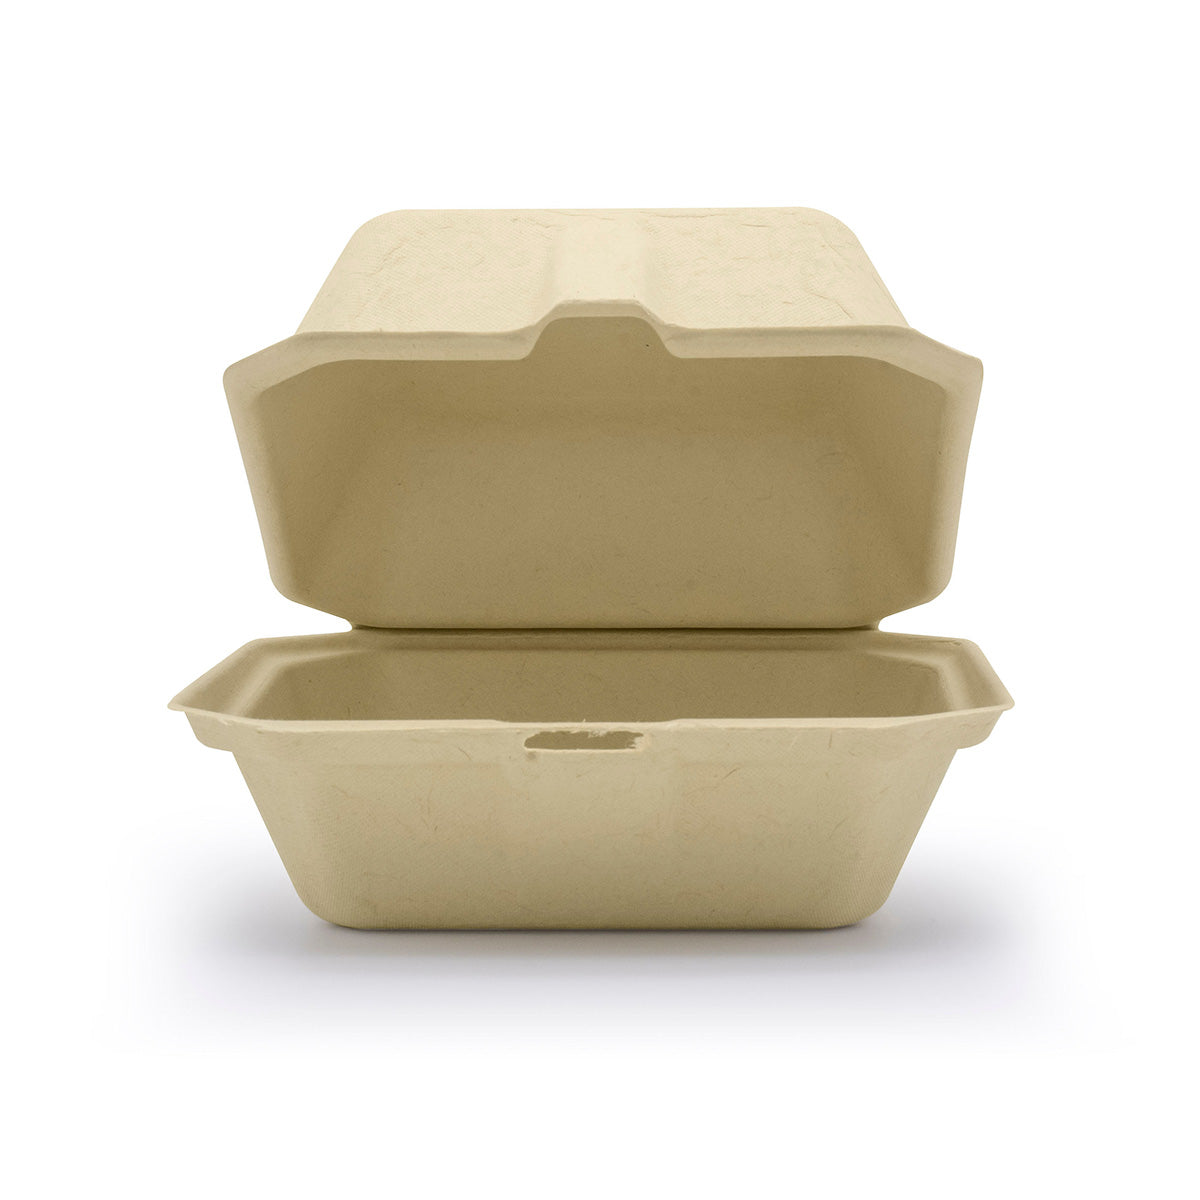 Compostable Clamshell Packaging & Take Out Containers